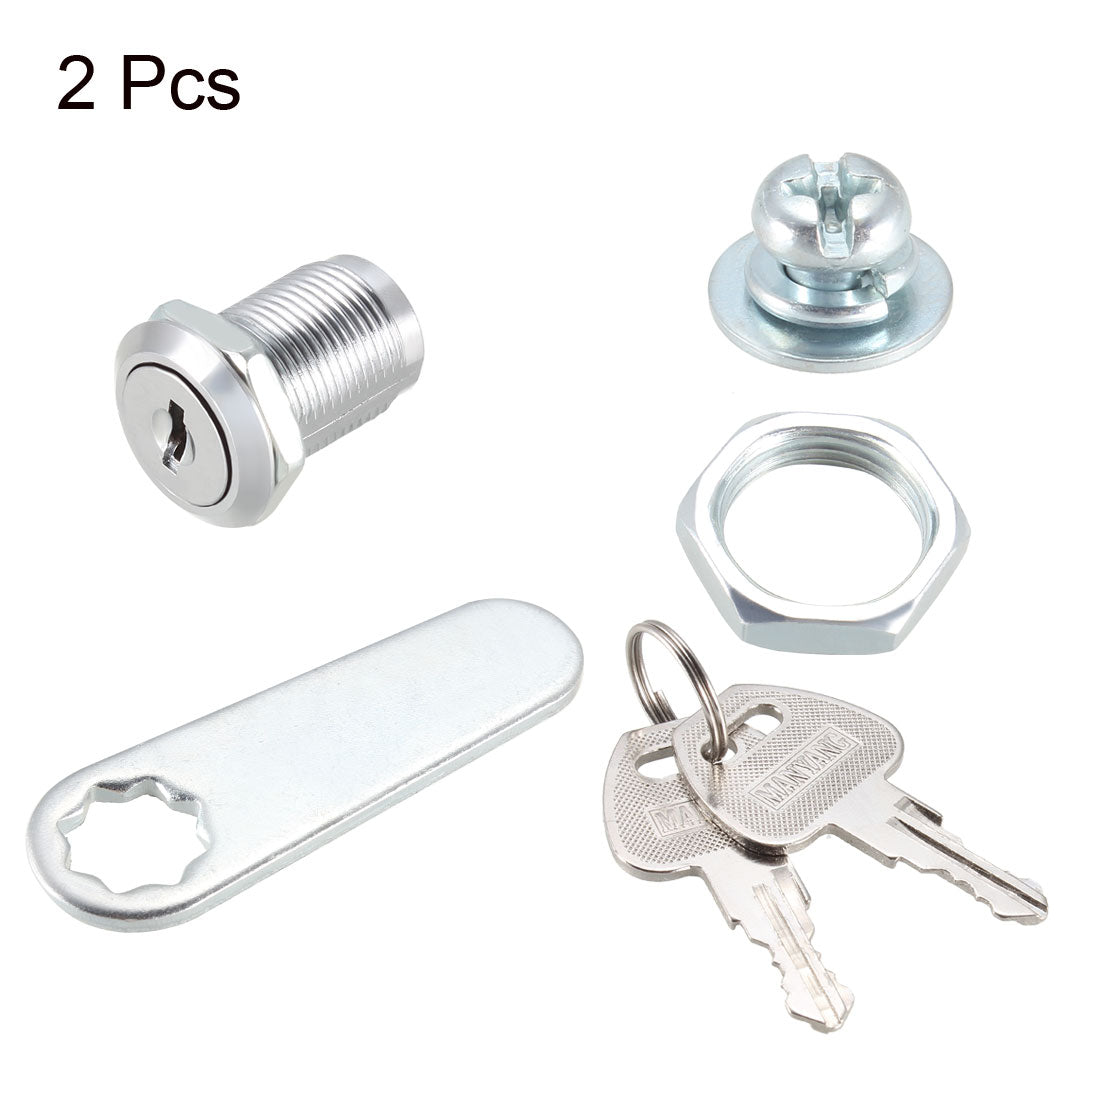 uxcell Uxcell Cam Locks 25mm Cylinder Length Fits Max 5/8-inch Panel Keyed Different 2Pcs